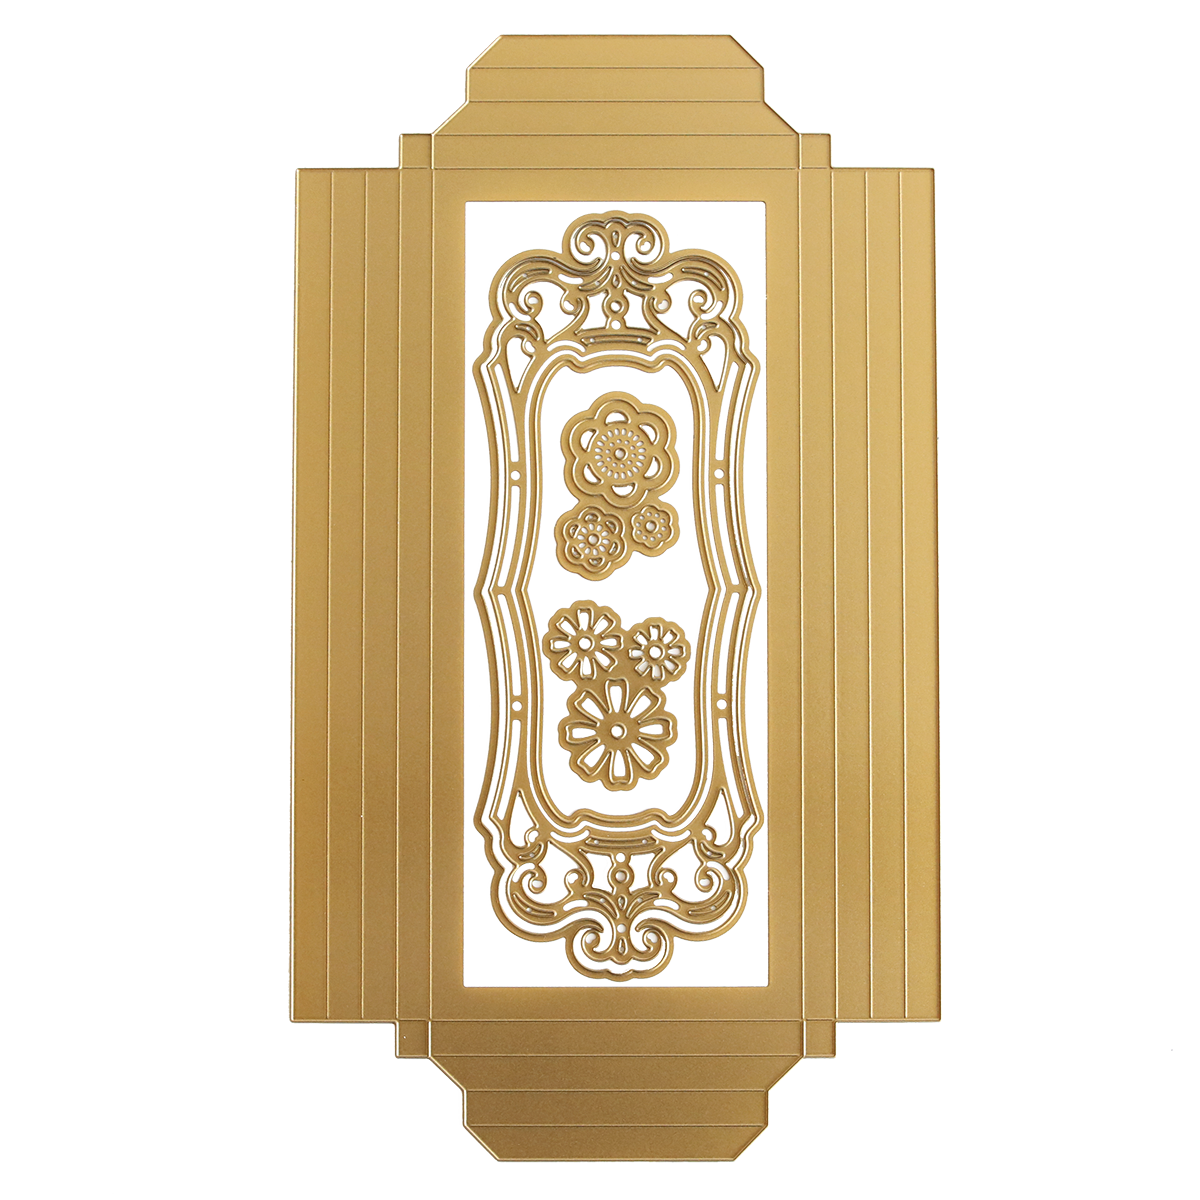 a golden door with a decorative design on it.